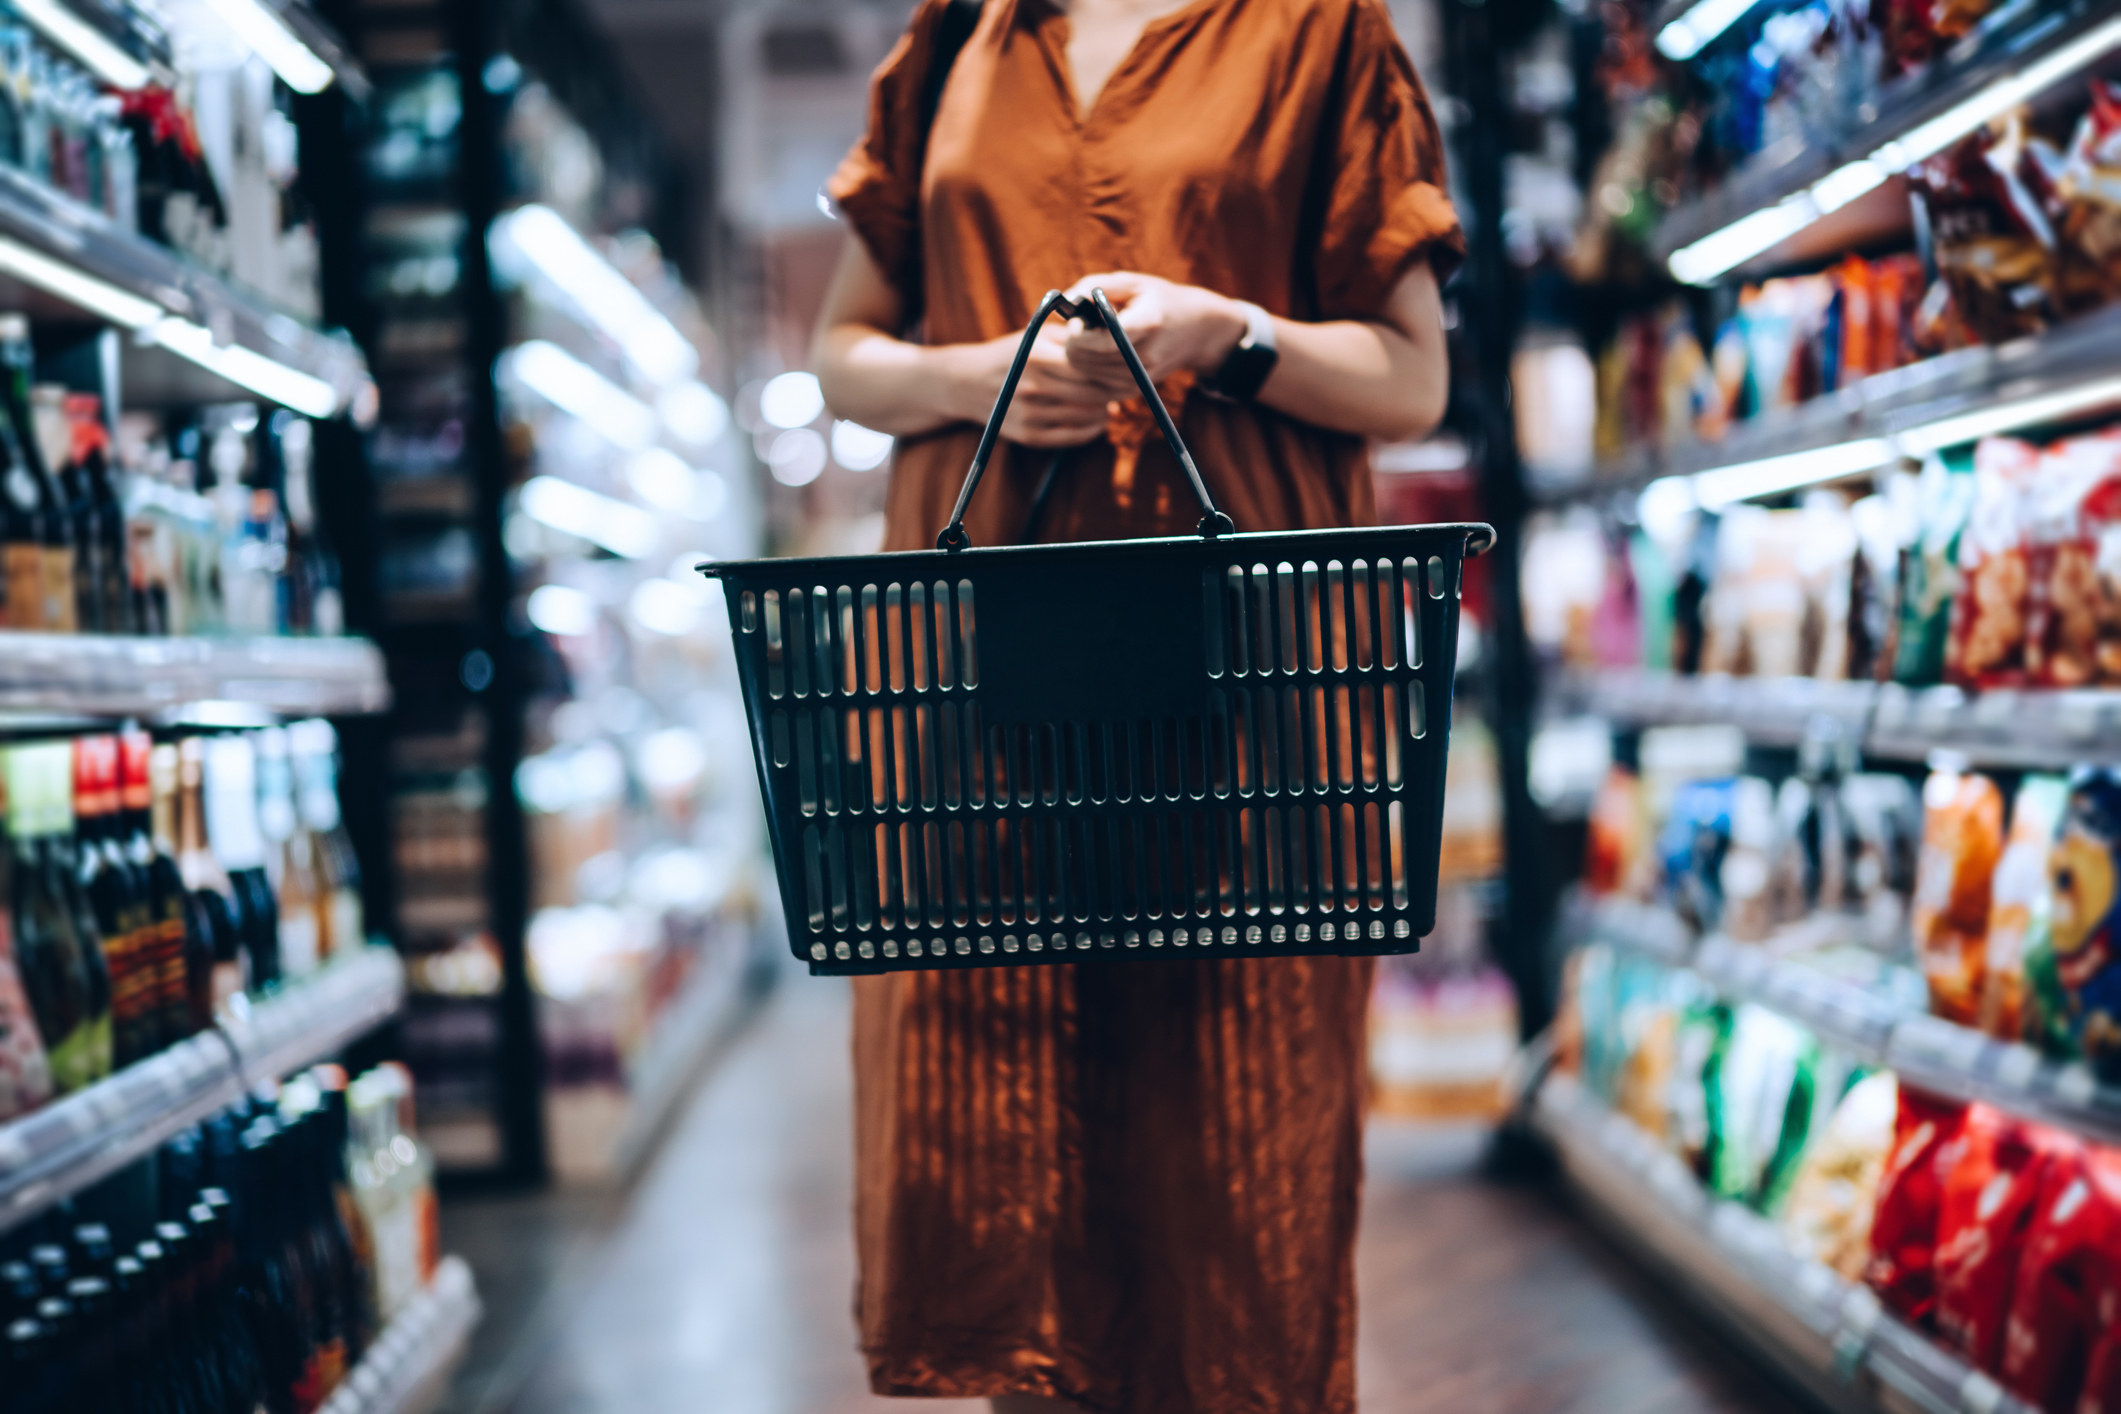 A person holding a basket in the grocery store